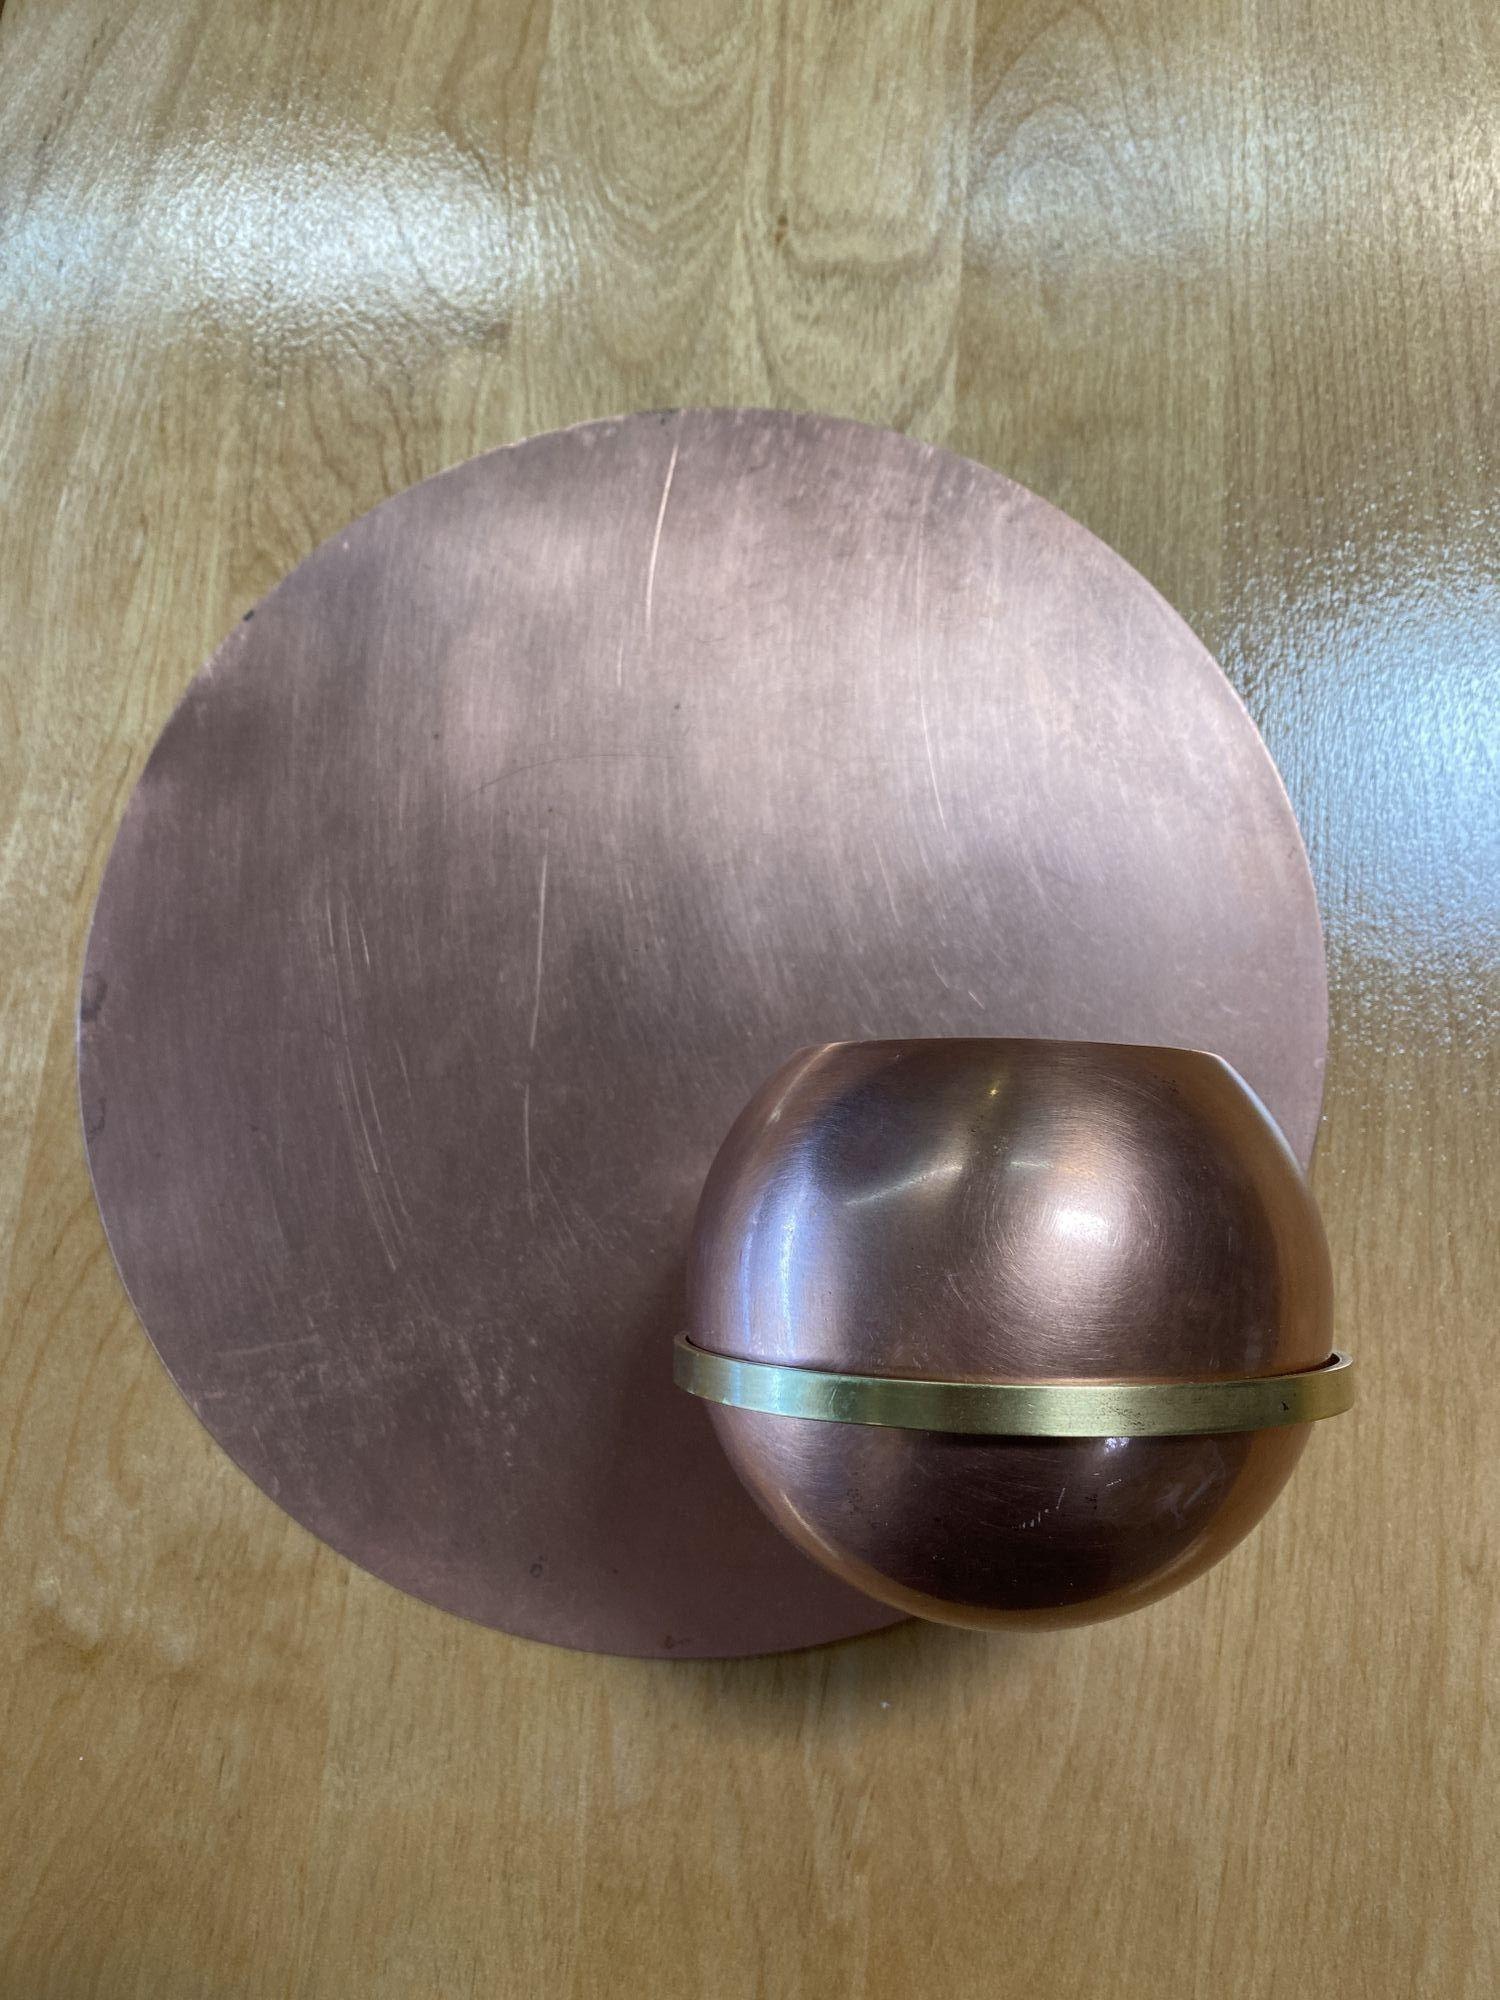 A unique pair of Art Deco wall planters crafted from copper and brass. This exceptional set includes two wall platters, each mirroring the other, presenting a round copper backplate, a brass ring-shaped holder, and a removable sphere-shaped planter.